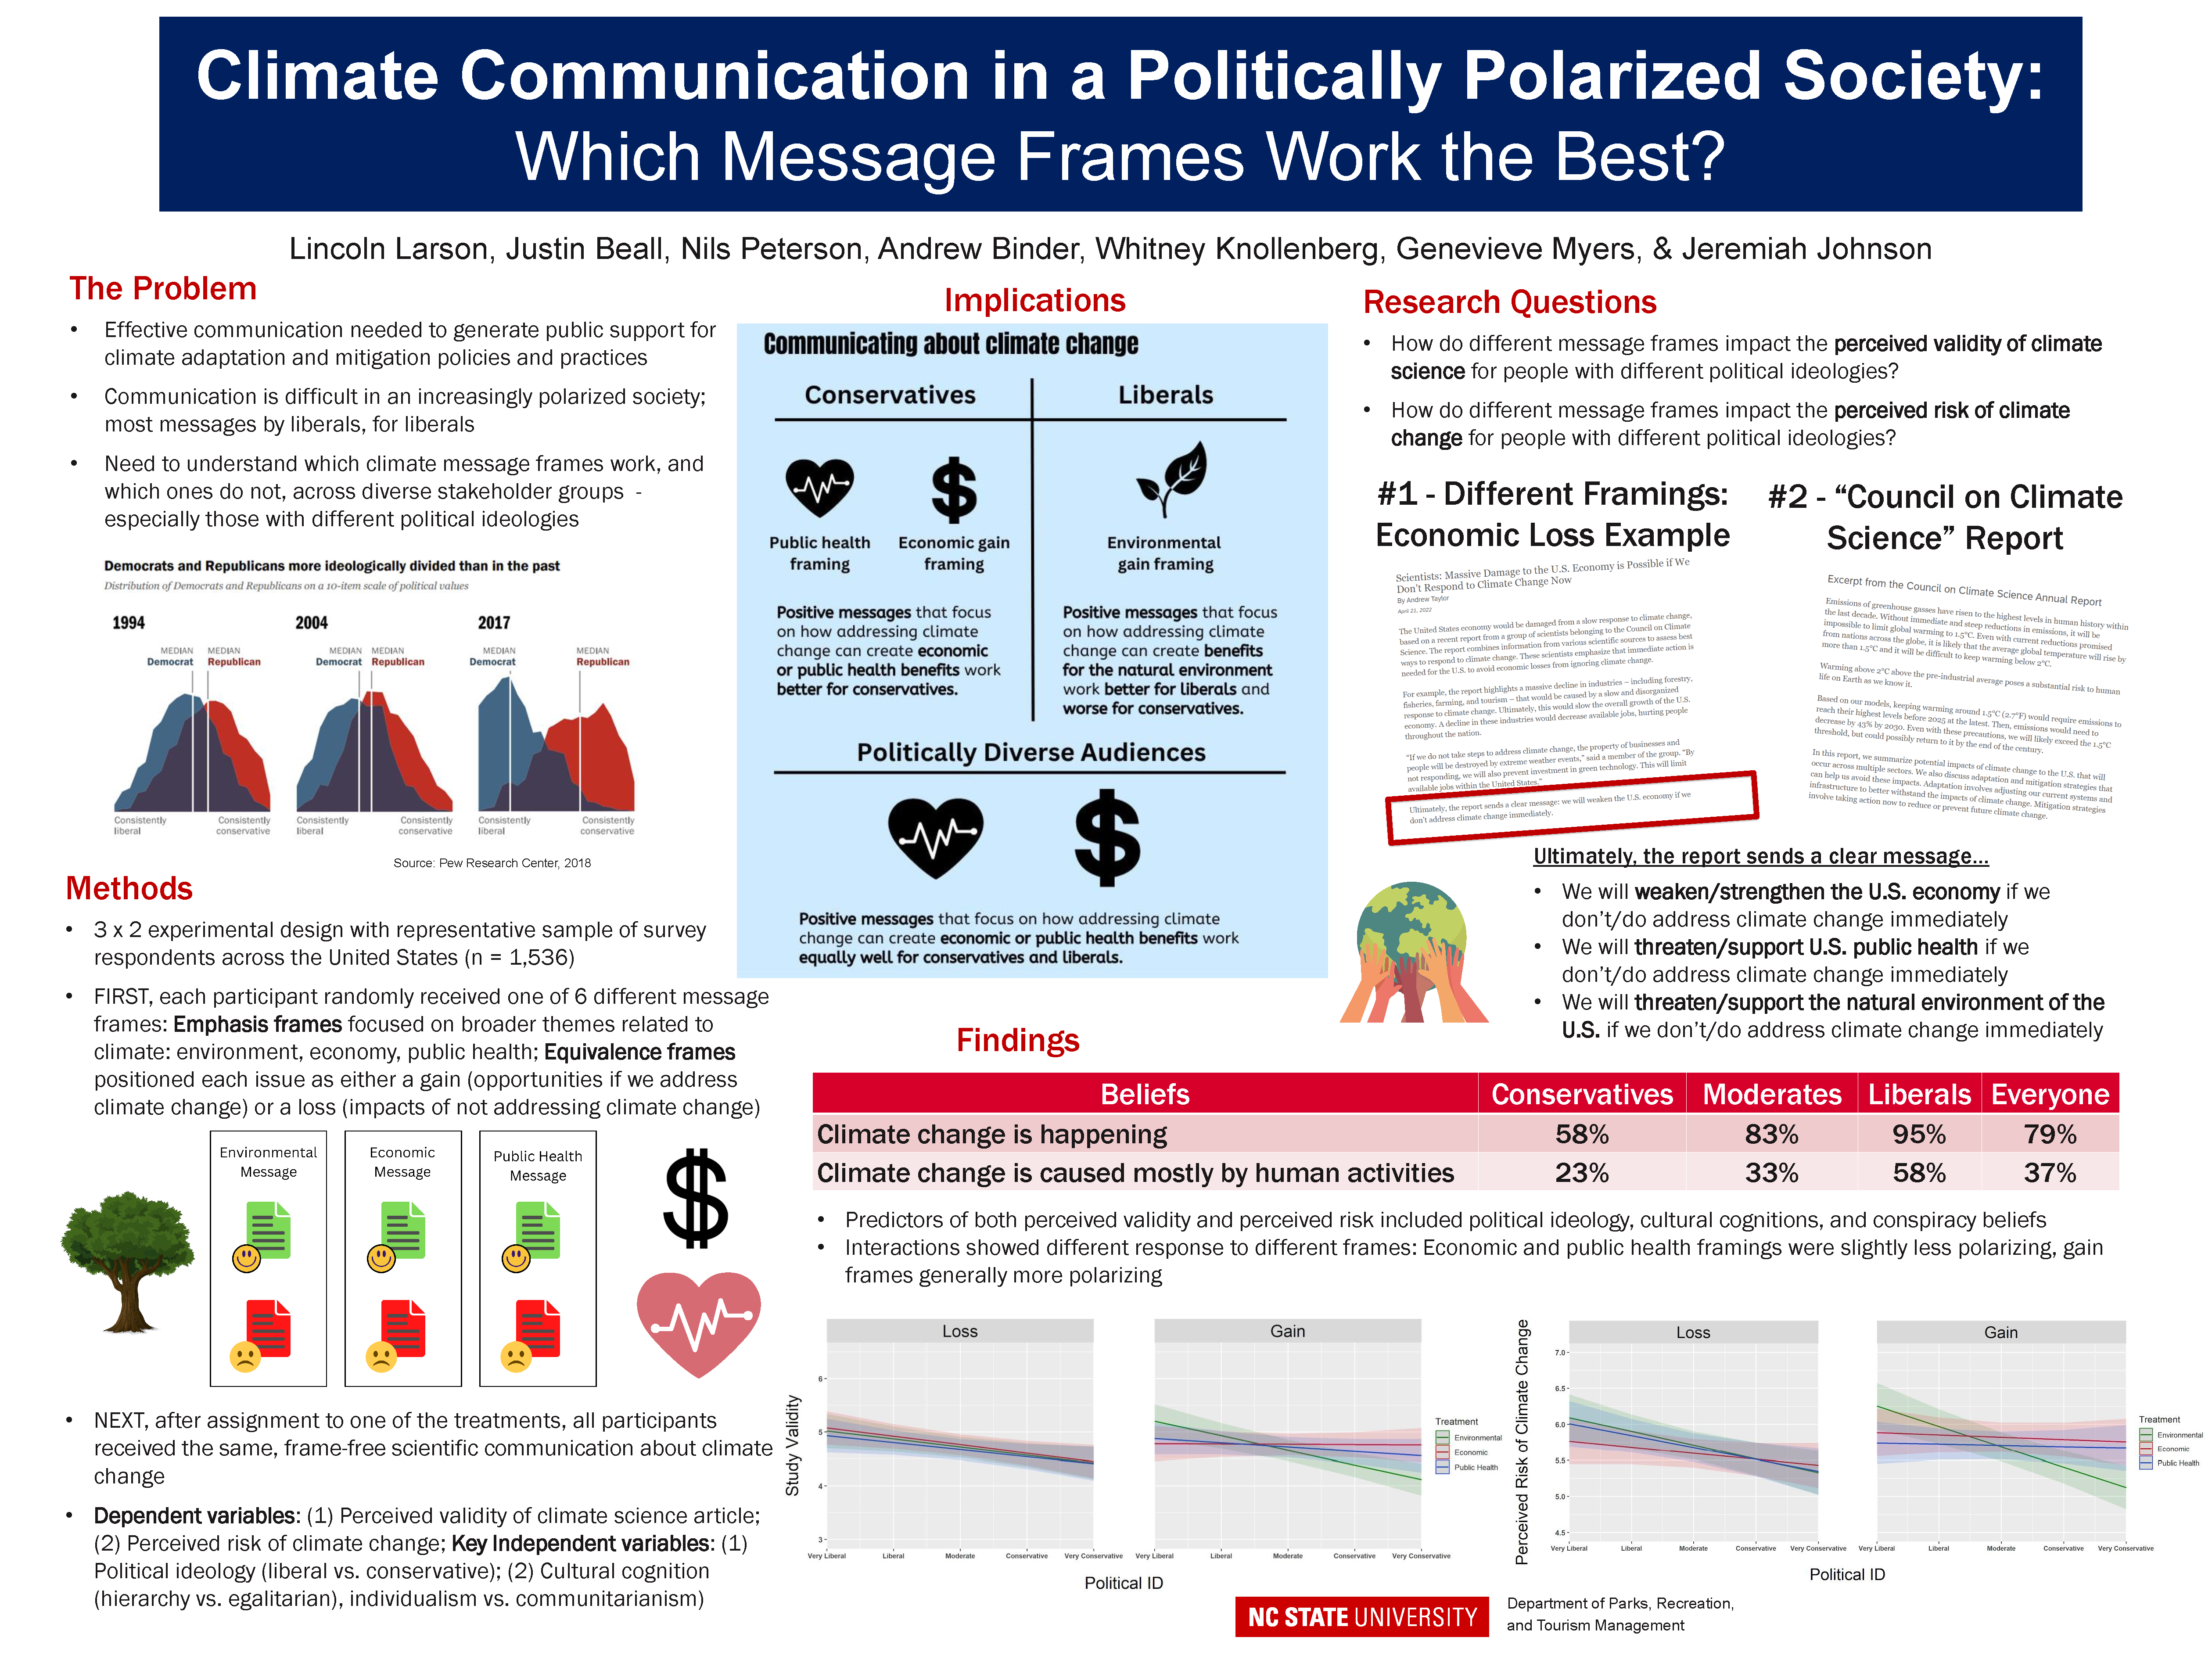 image of Lincoln Larson's poster, "Climate Communication in a Politically Polarized Society: Which Message Frames Work the Best?"